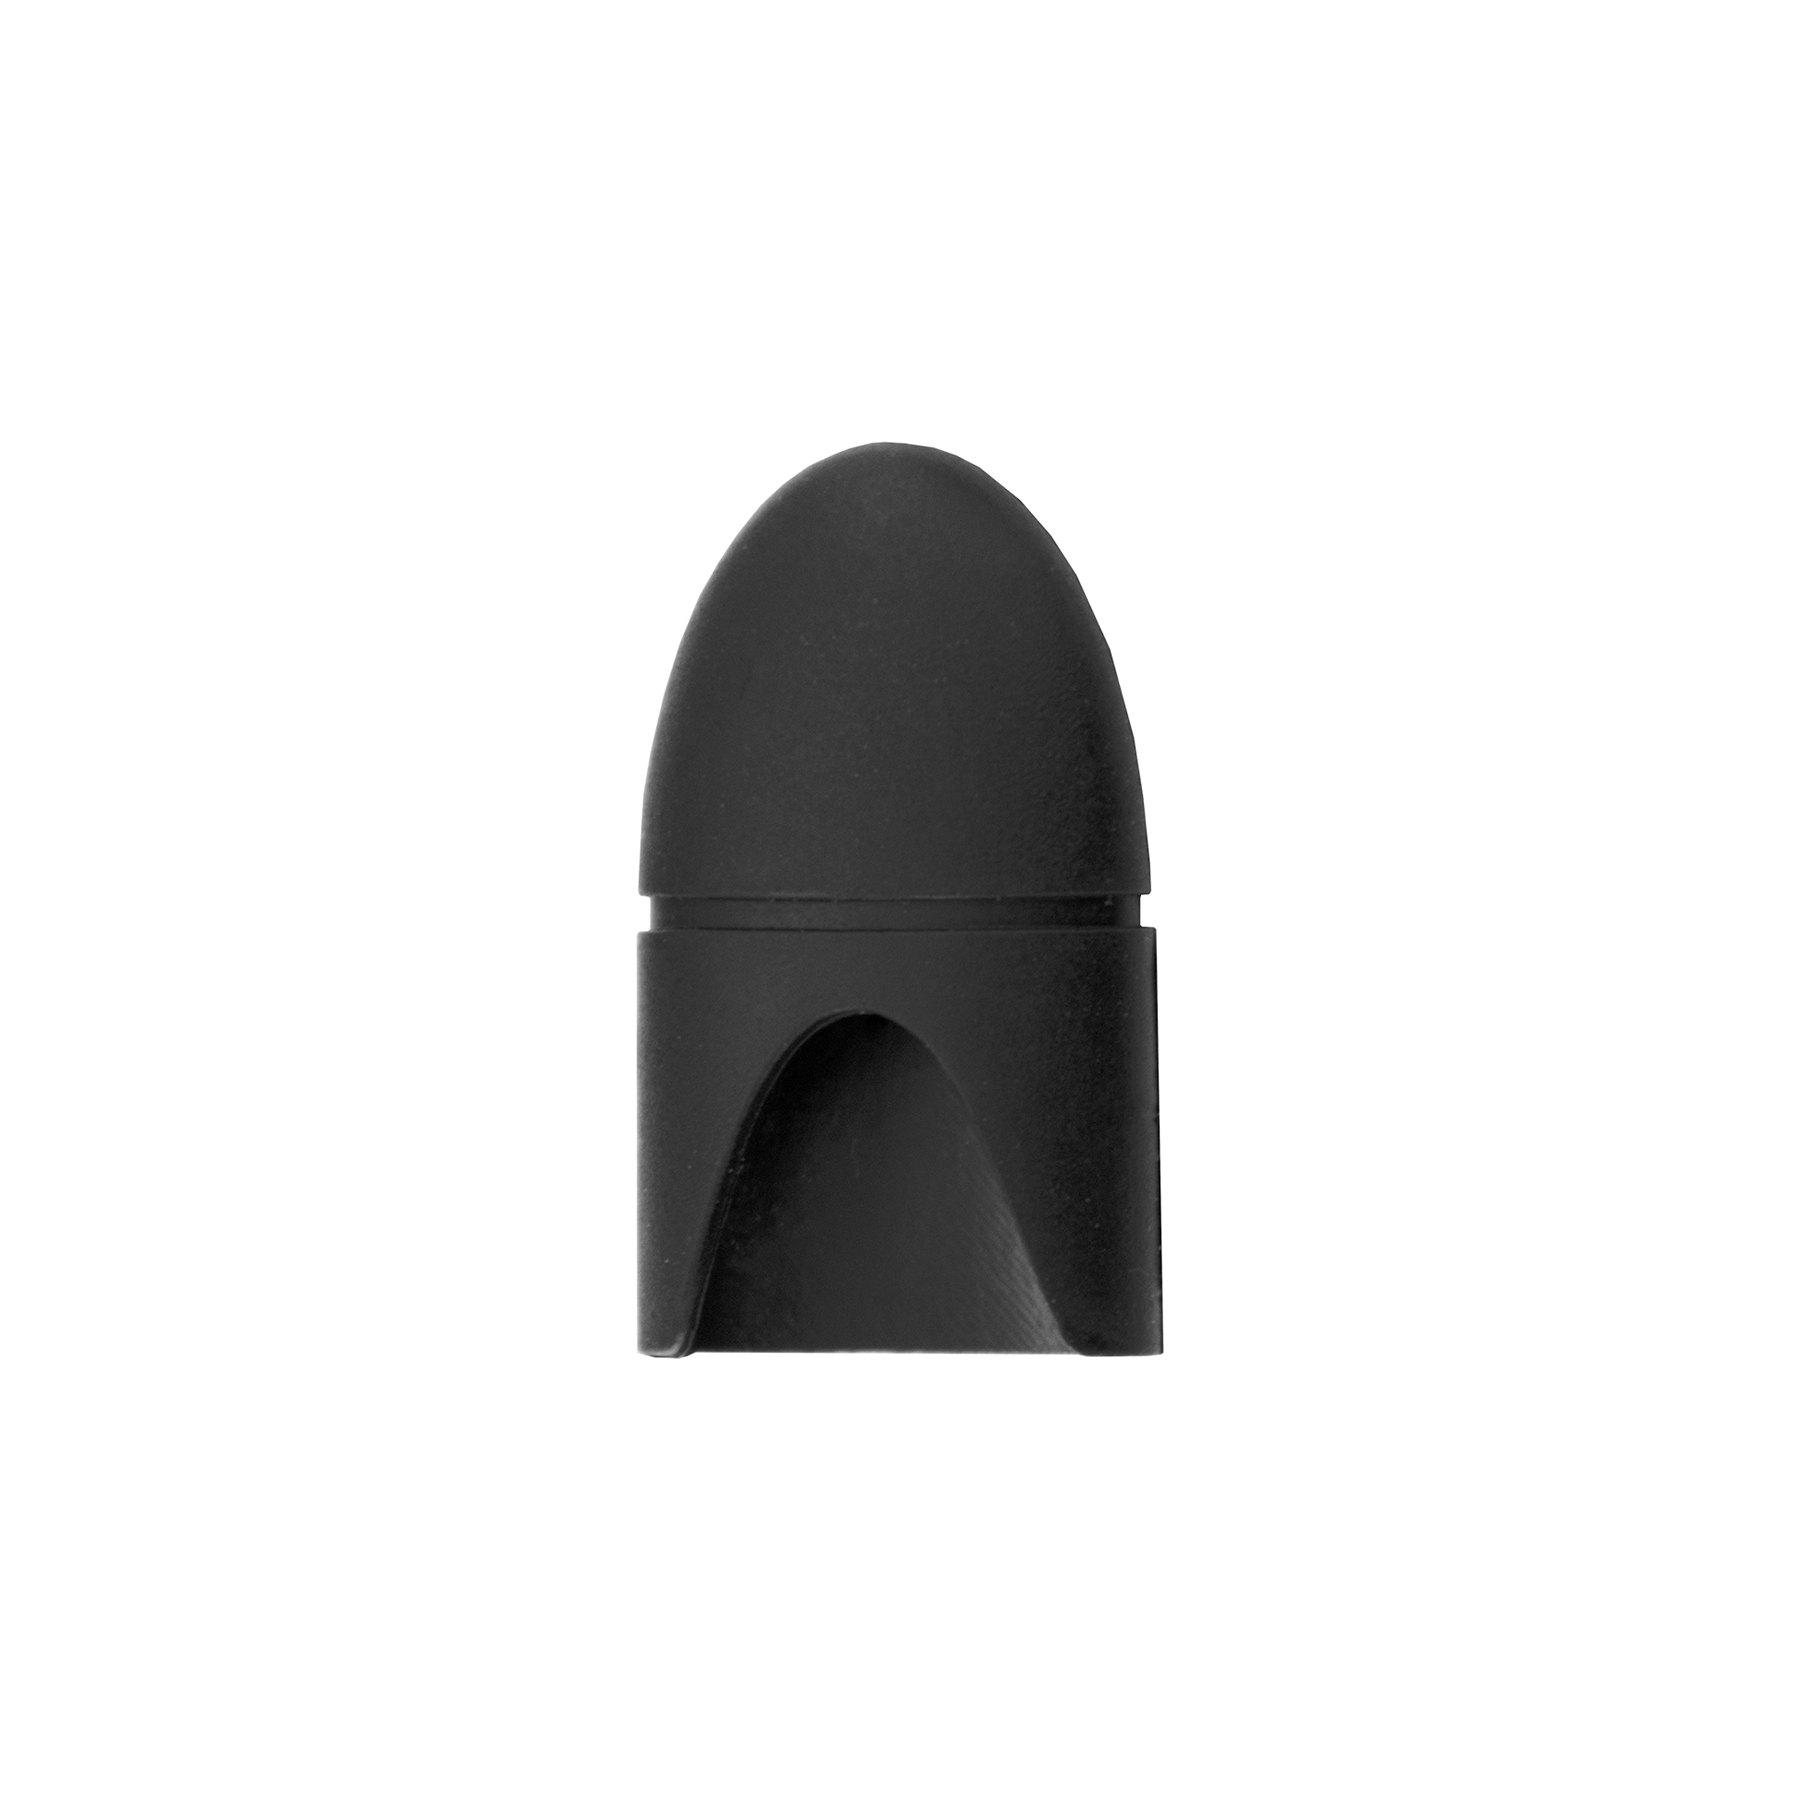 Silicone Soak Off Cap BLACK (5pcs/pack), Abstract | 075831